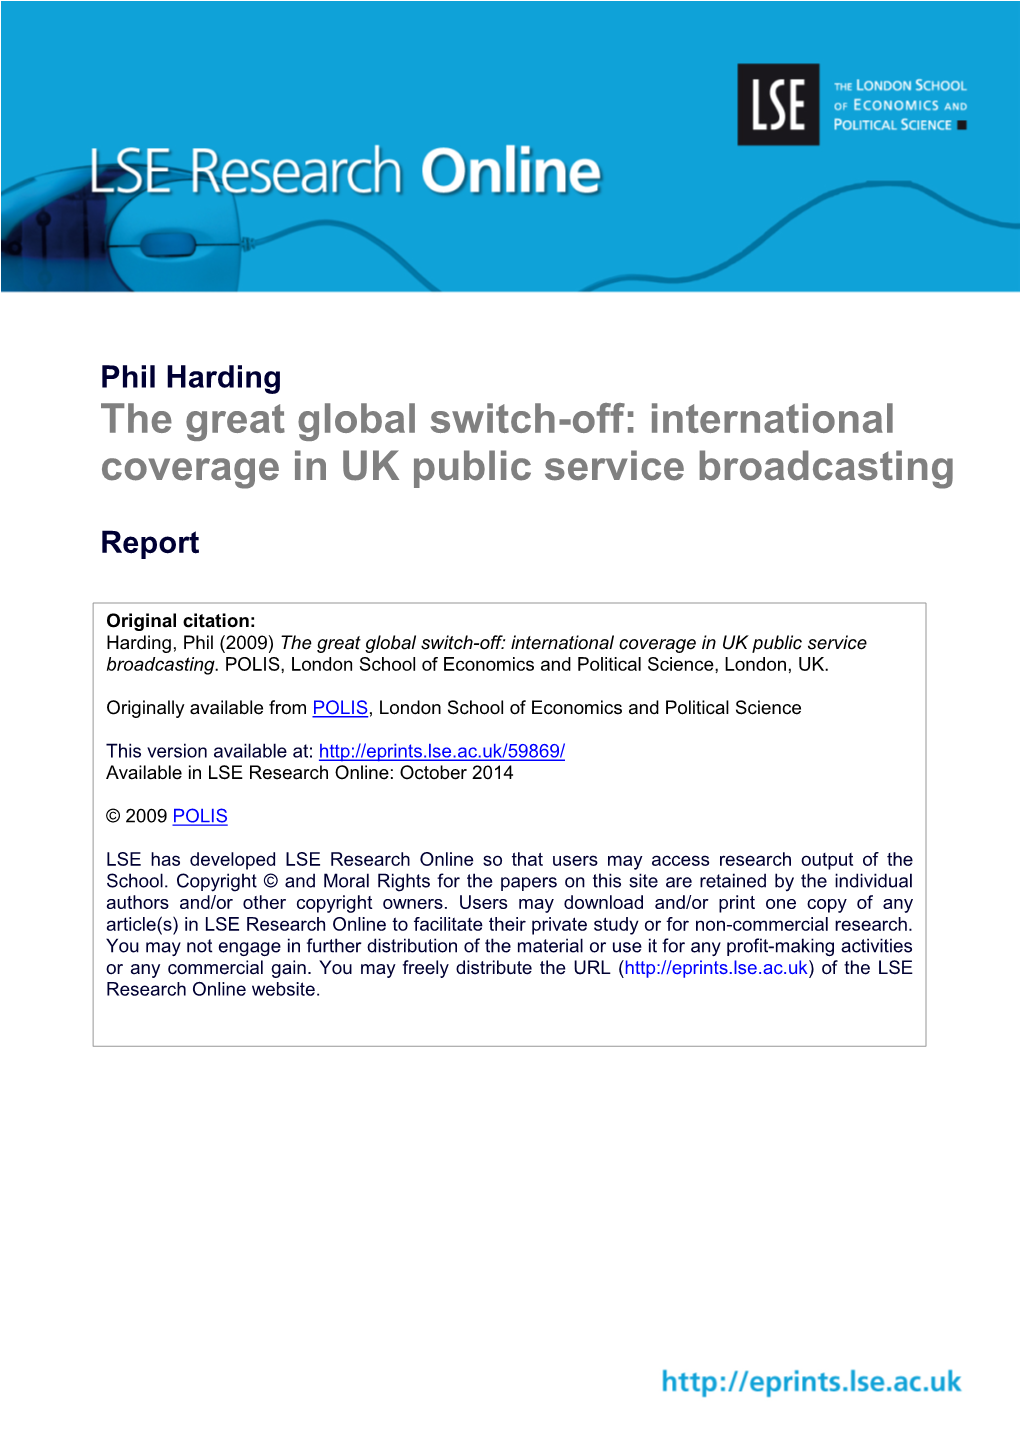 The Great Global Switch-Off: International Coverage in UK Public Service Broadcasting